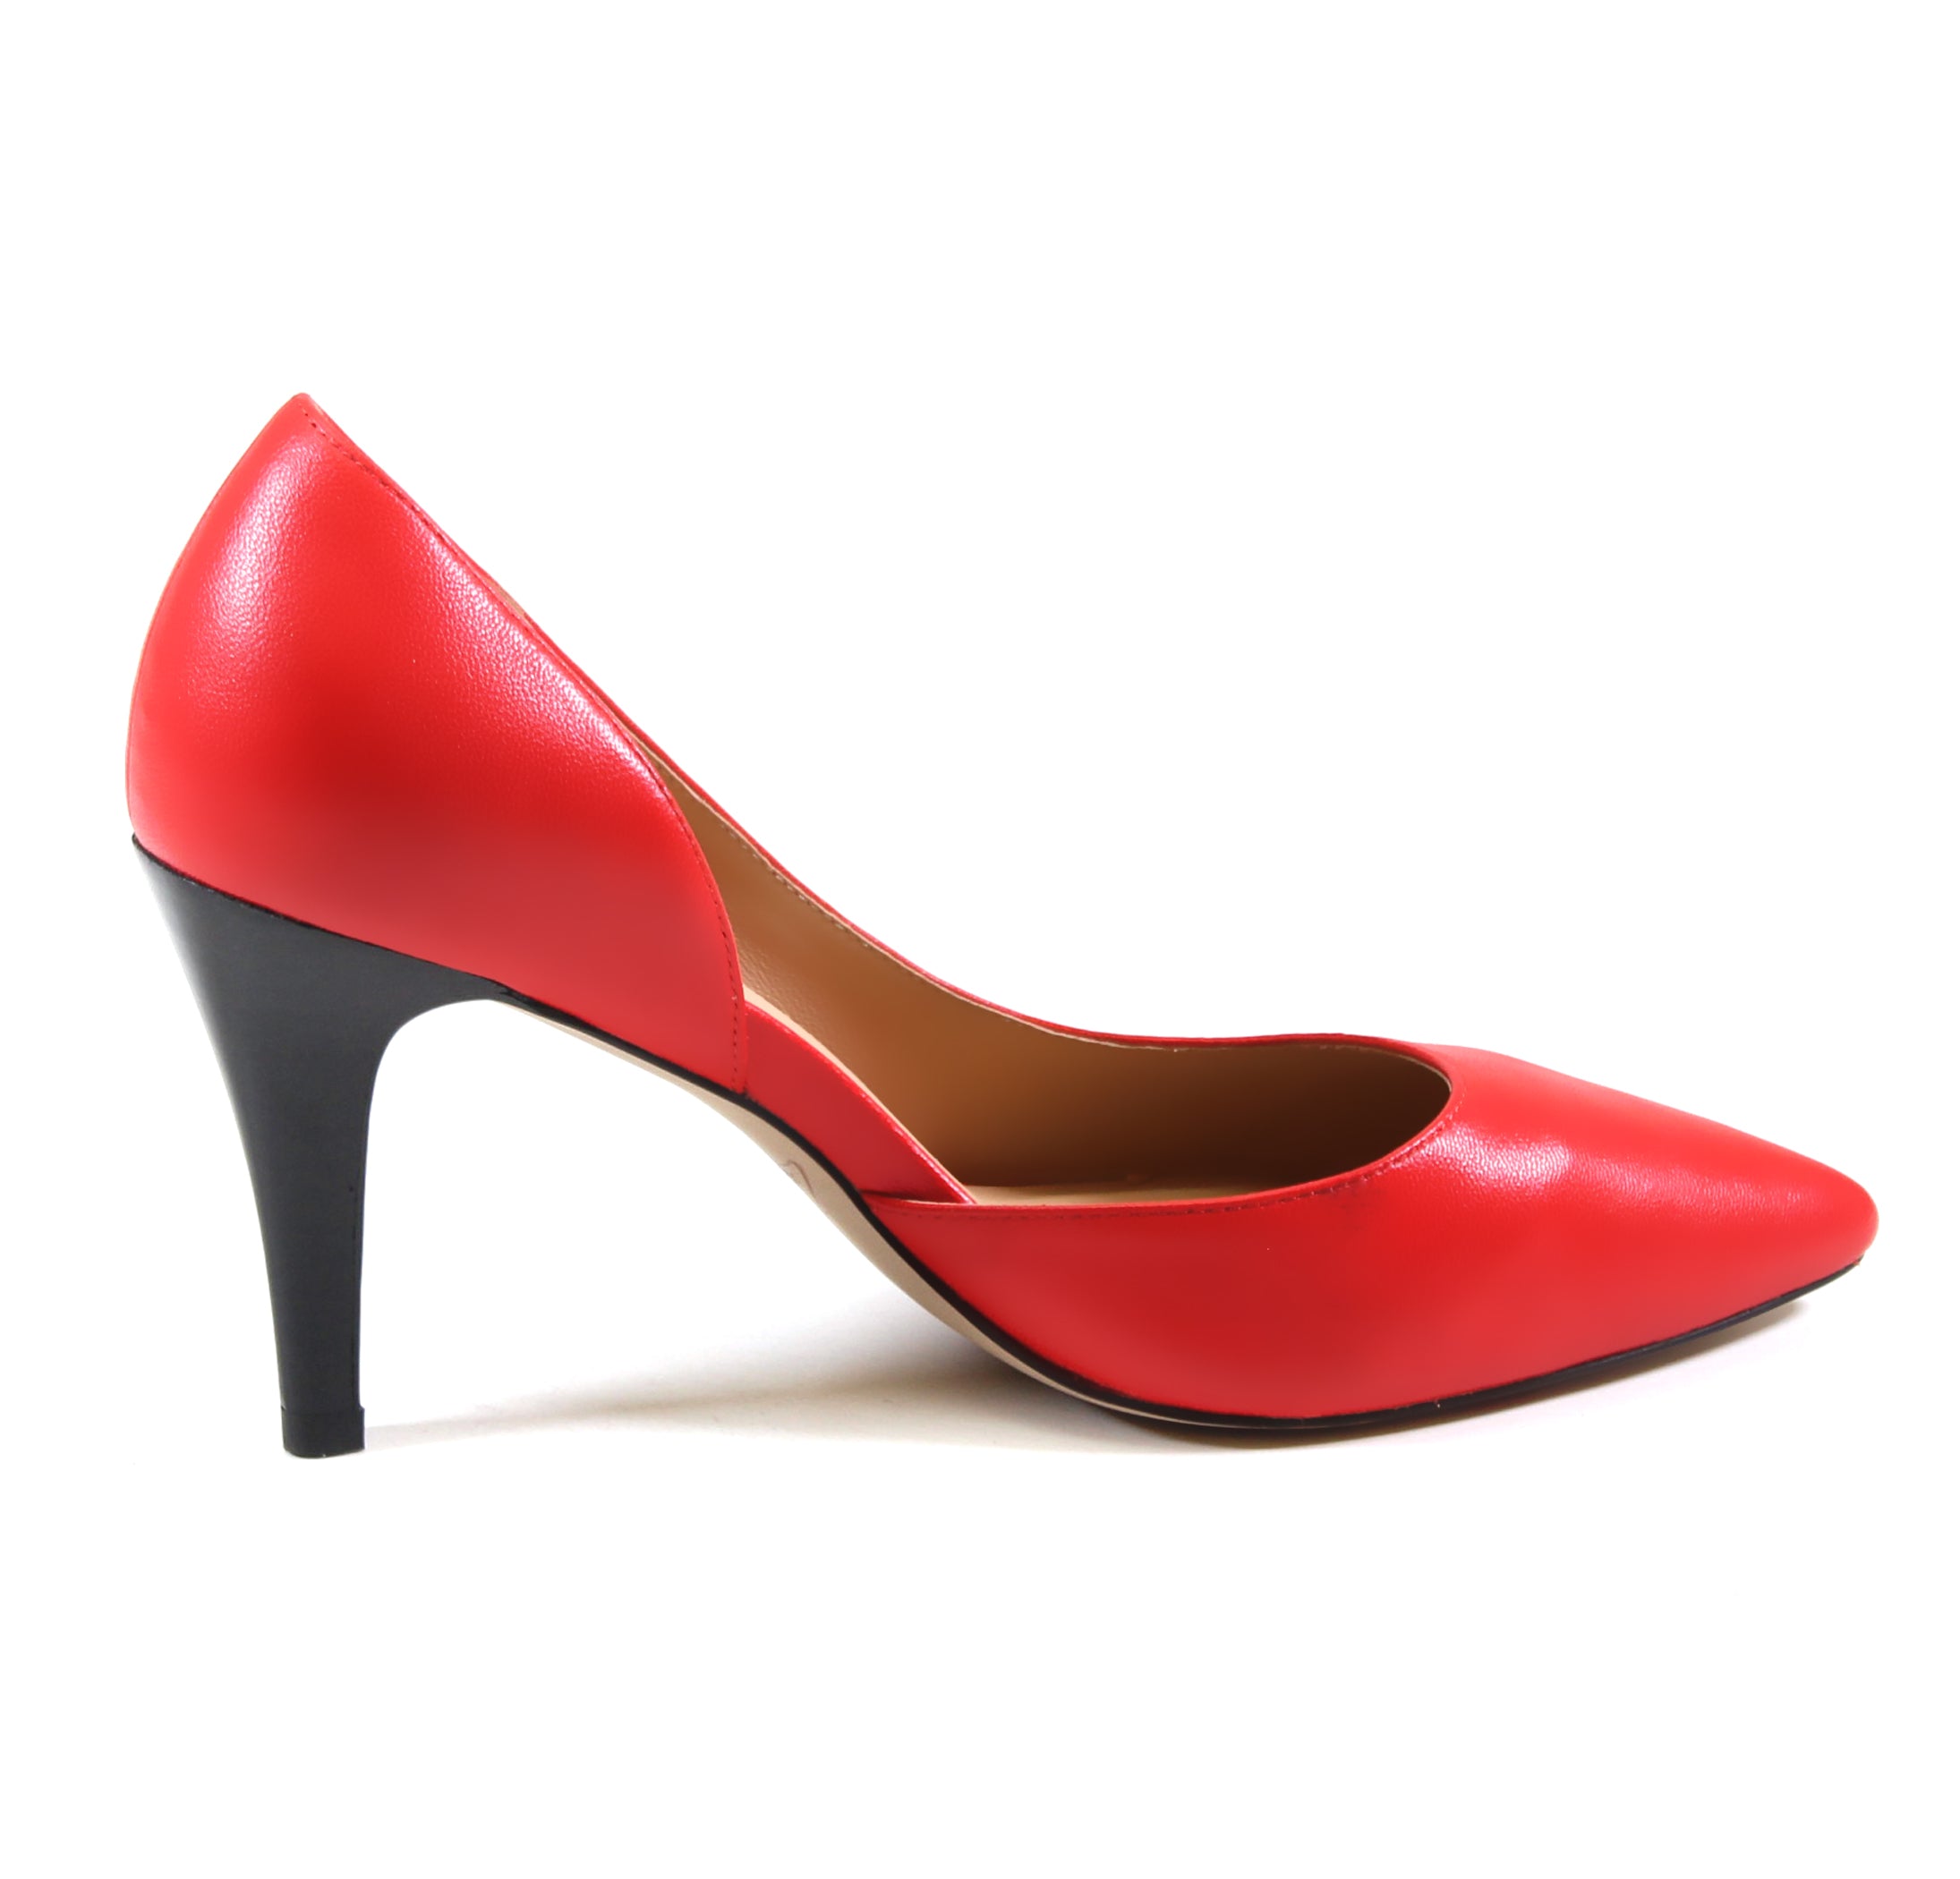  Luichiny LTD GOR GEOUS in Red - Diba Shoes